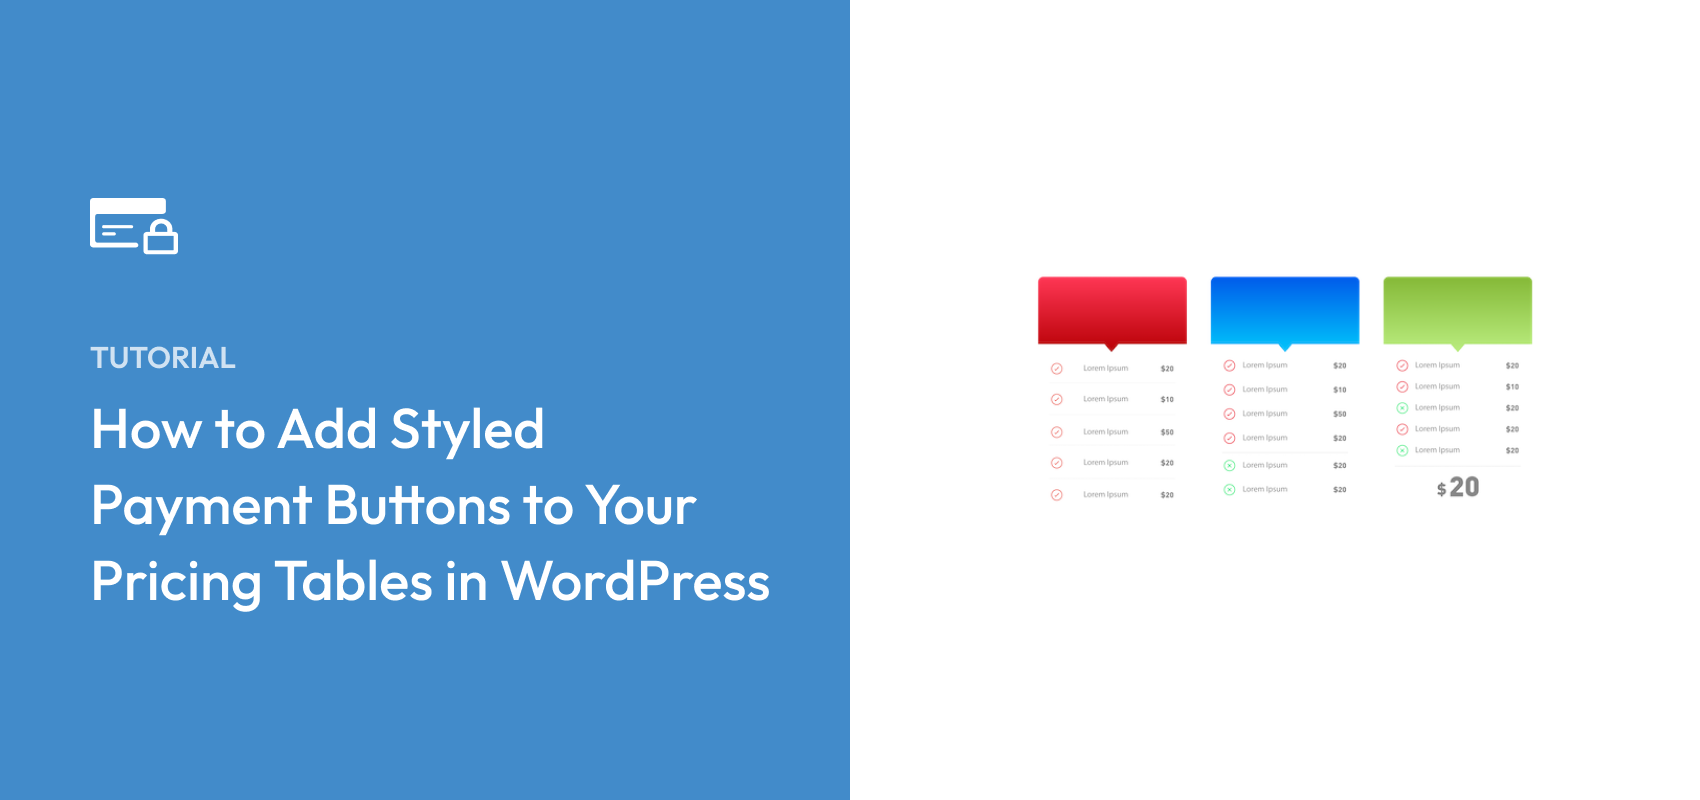 How to Add Styled Payment Buttons to Your Pricing Tables in WordPress